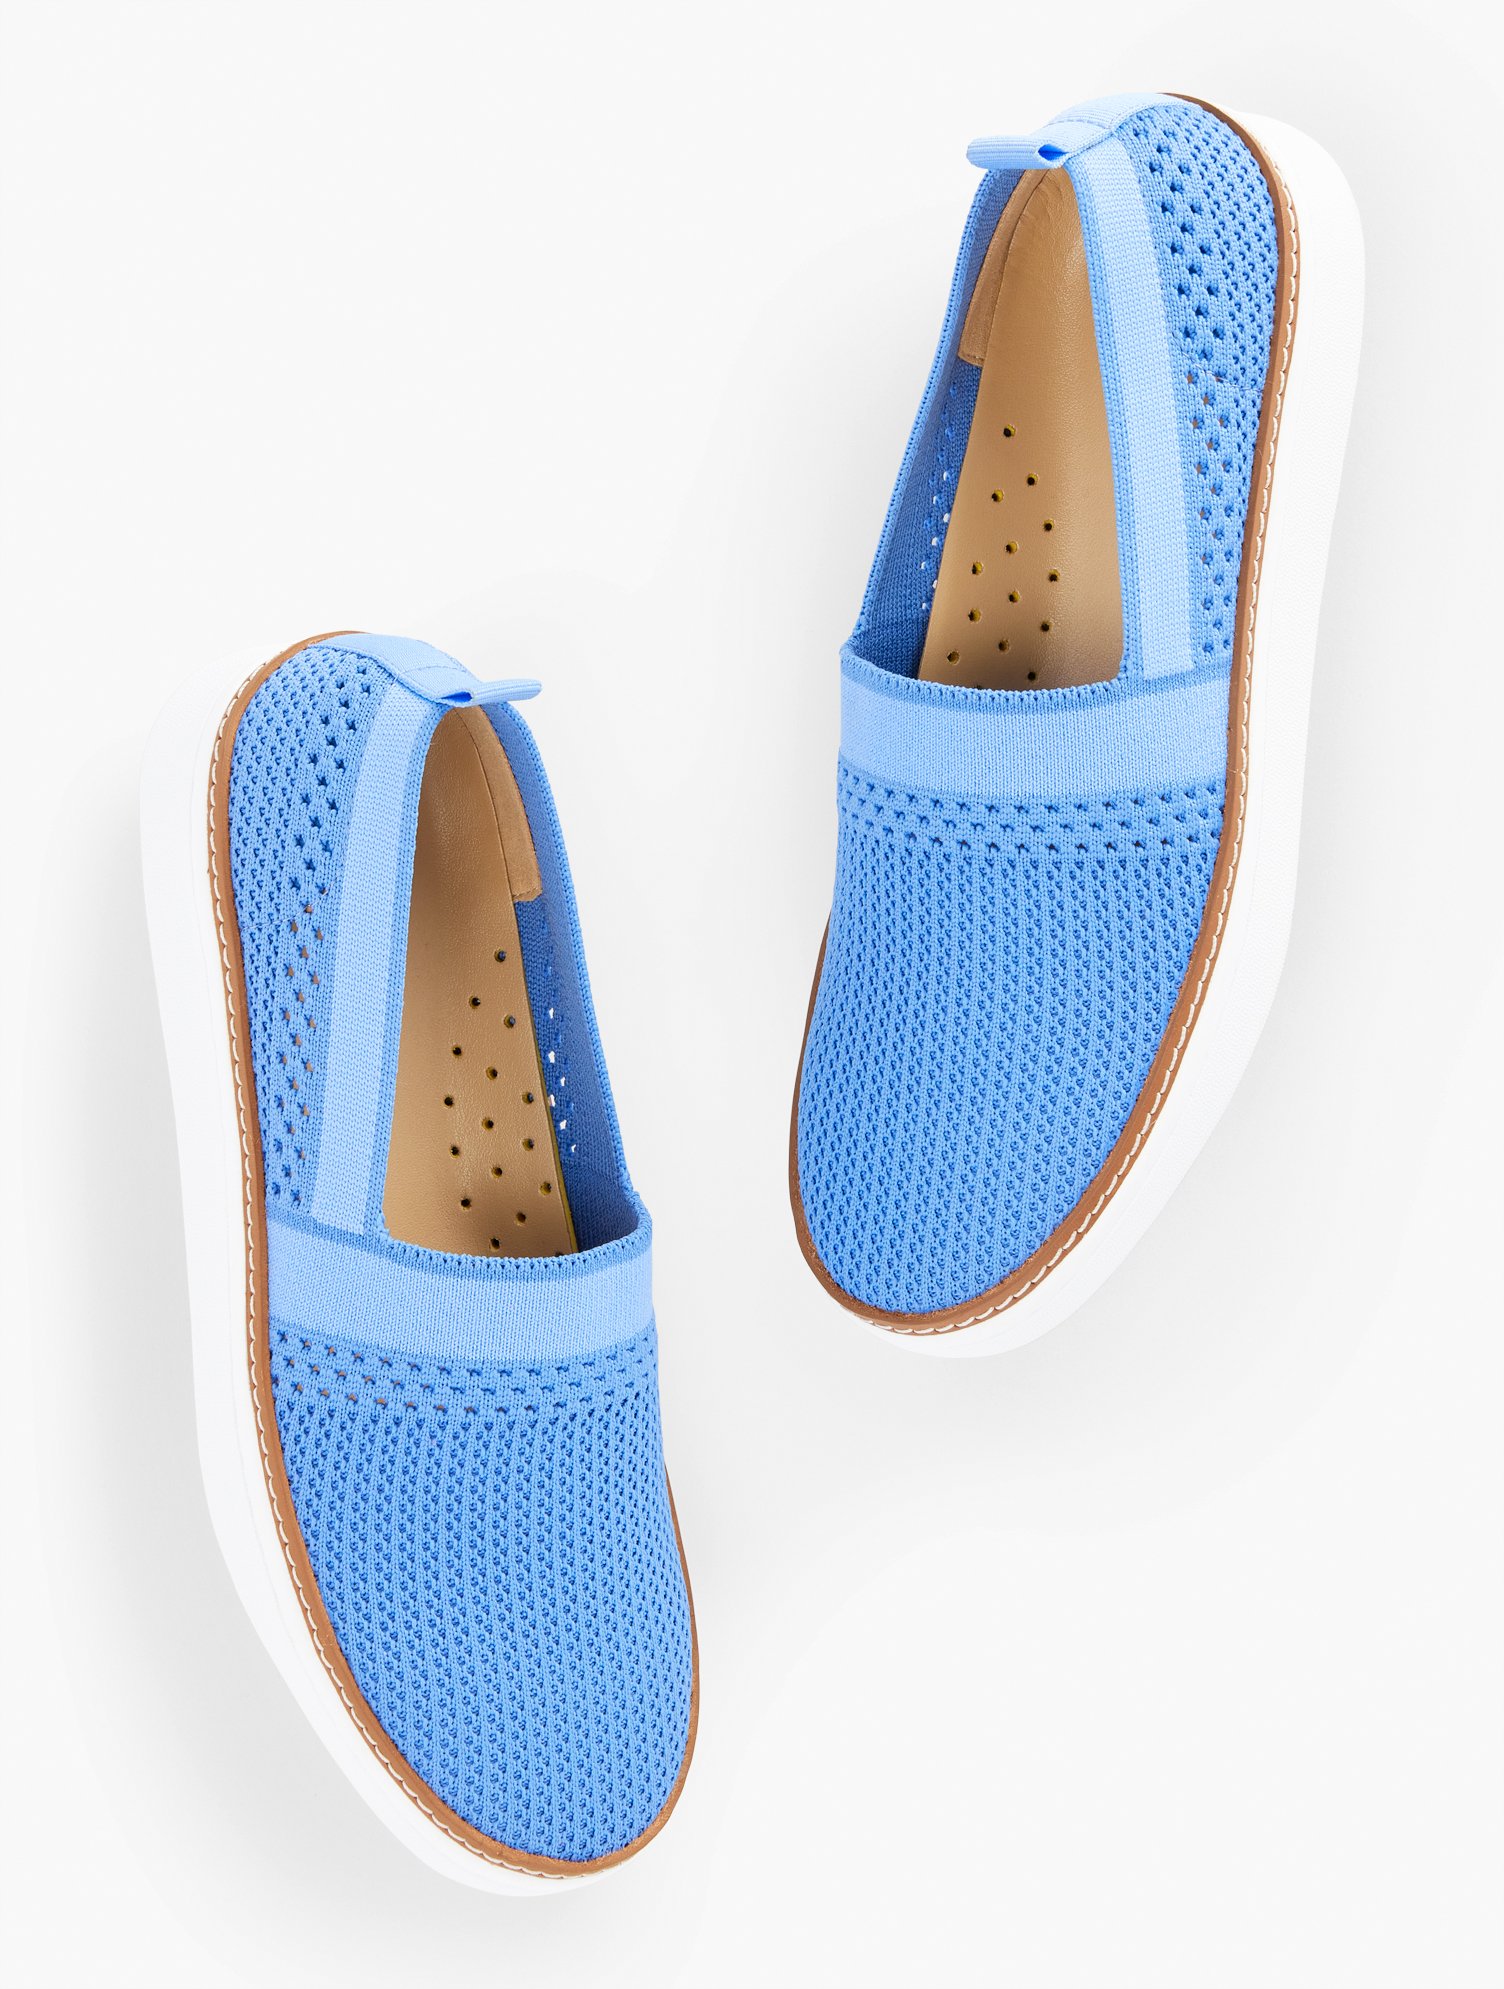 Talbots Brittany Knit Slip-on Sneakers - Blue Iris/blue Sky - 7m - 100% Cotton  In Blue Iris,blue Sky